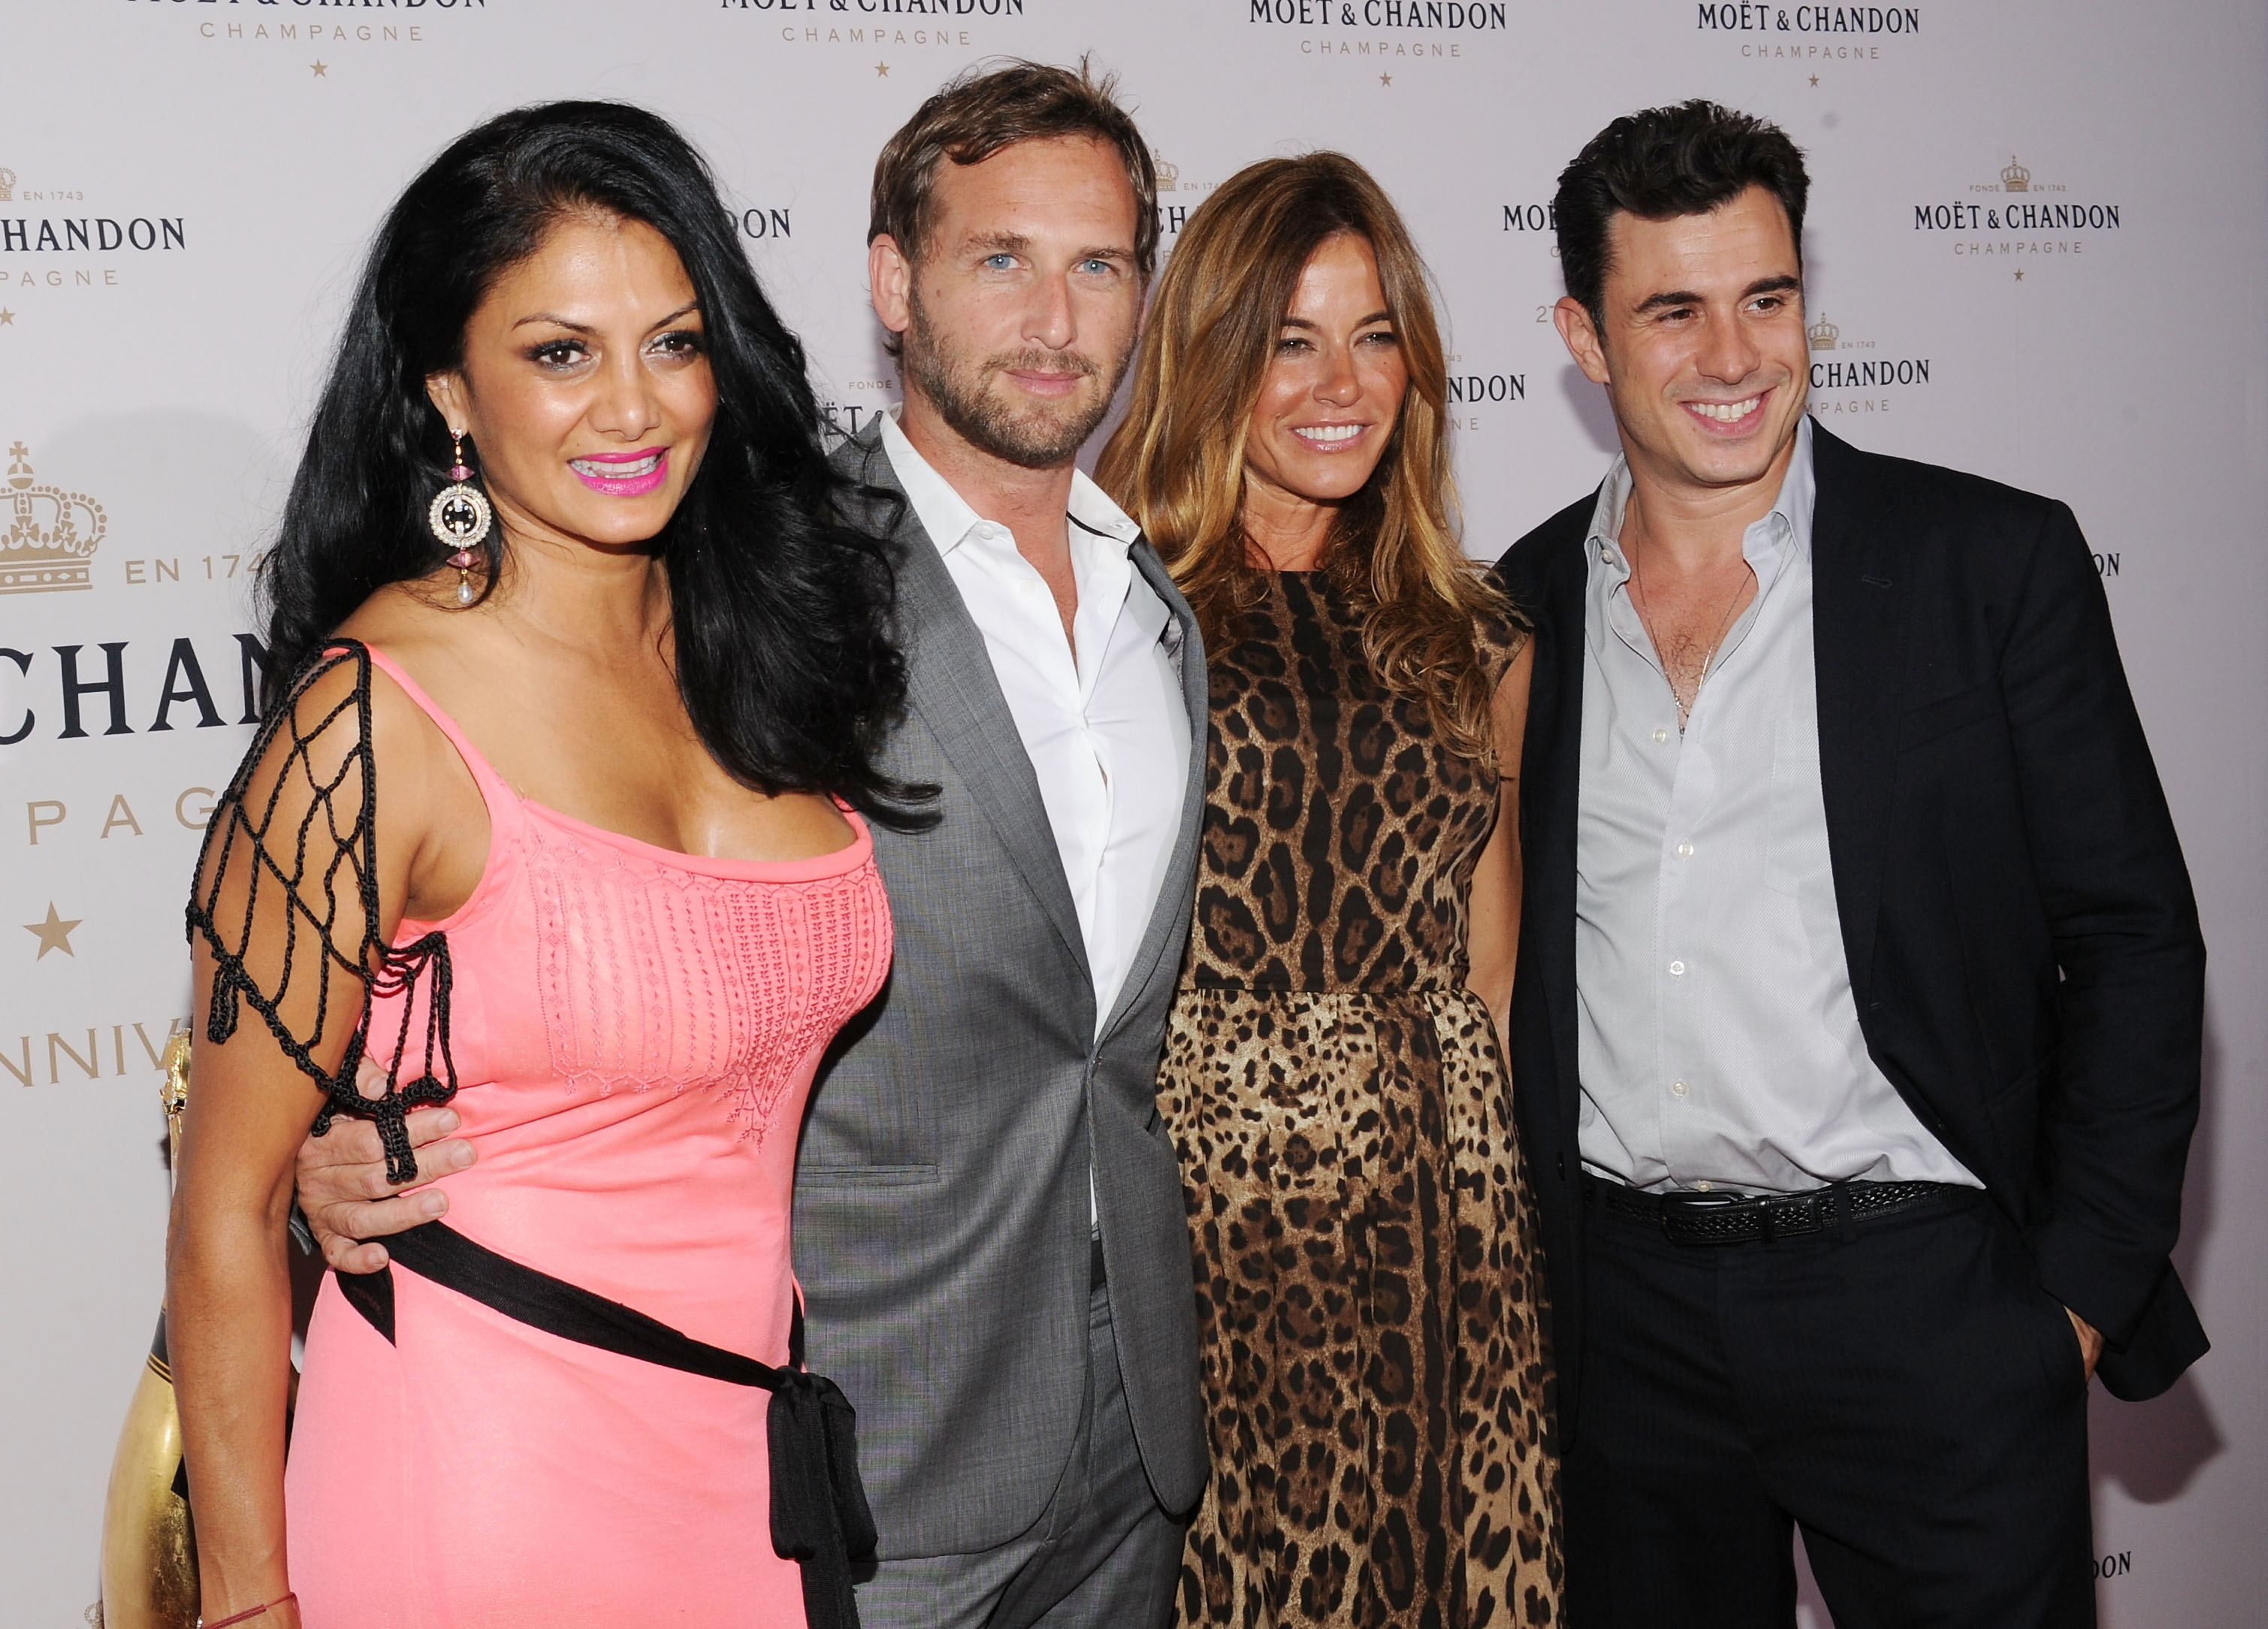 NEW YORK, NY - AUGUST 20:  (L-R) Donna D'Cruz, Josh Lucas, Kelly Bensimon, and Troy Curtis attend Moet & Chandon Celebrates Its 270th Anniversary With New Global Brand Ambassador, International Tennis Champion, Roger Federer at Chelsea Piers Sports Center on August 20, 2013 in New York City.  (Photo by Bryan Bedder/Getty Images for Moet & Chandon)